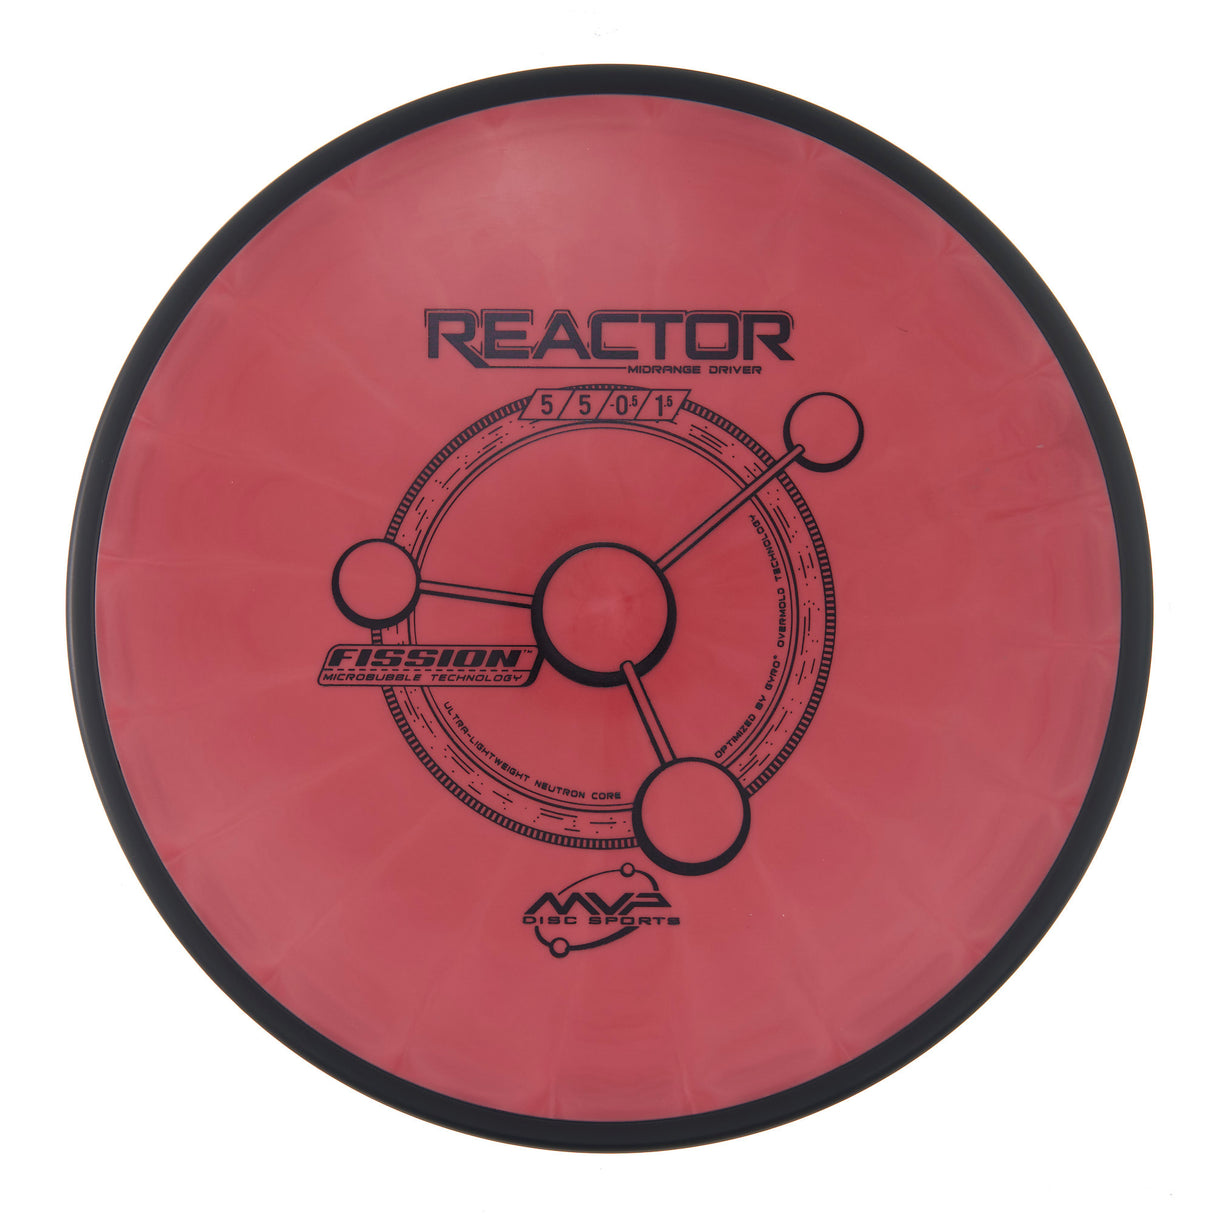 MVP Reactor - Fission 159g | Style 0007